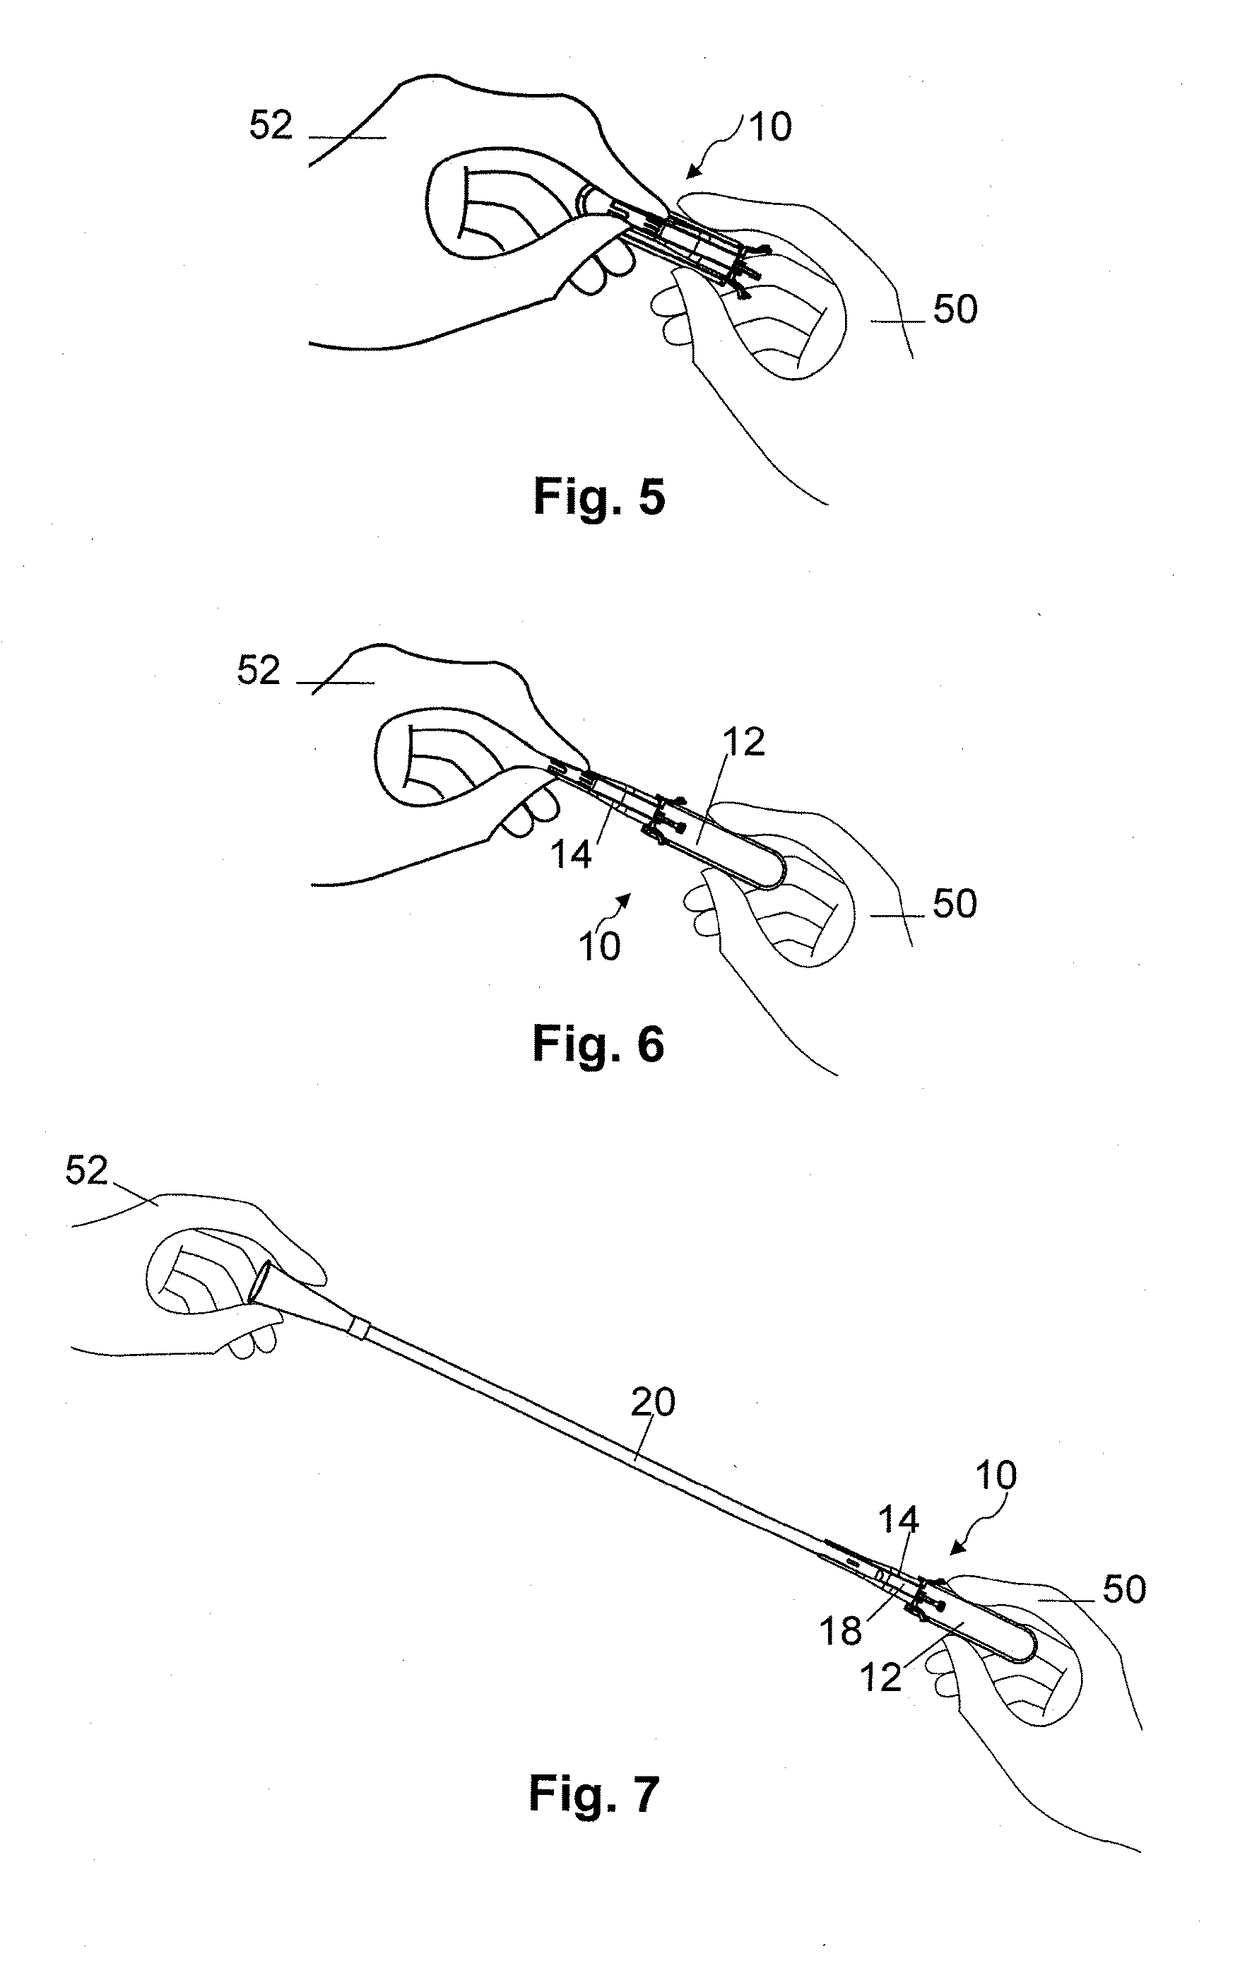 A folding device to assist in self insertion of a catheter tube into the urethral orifice of women